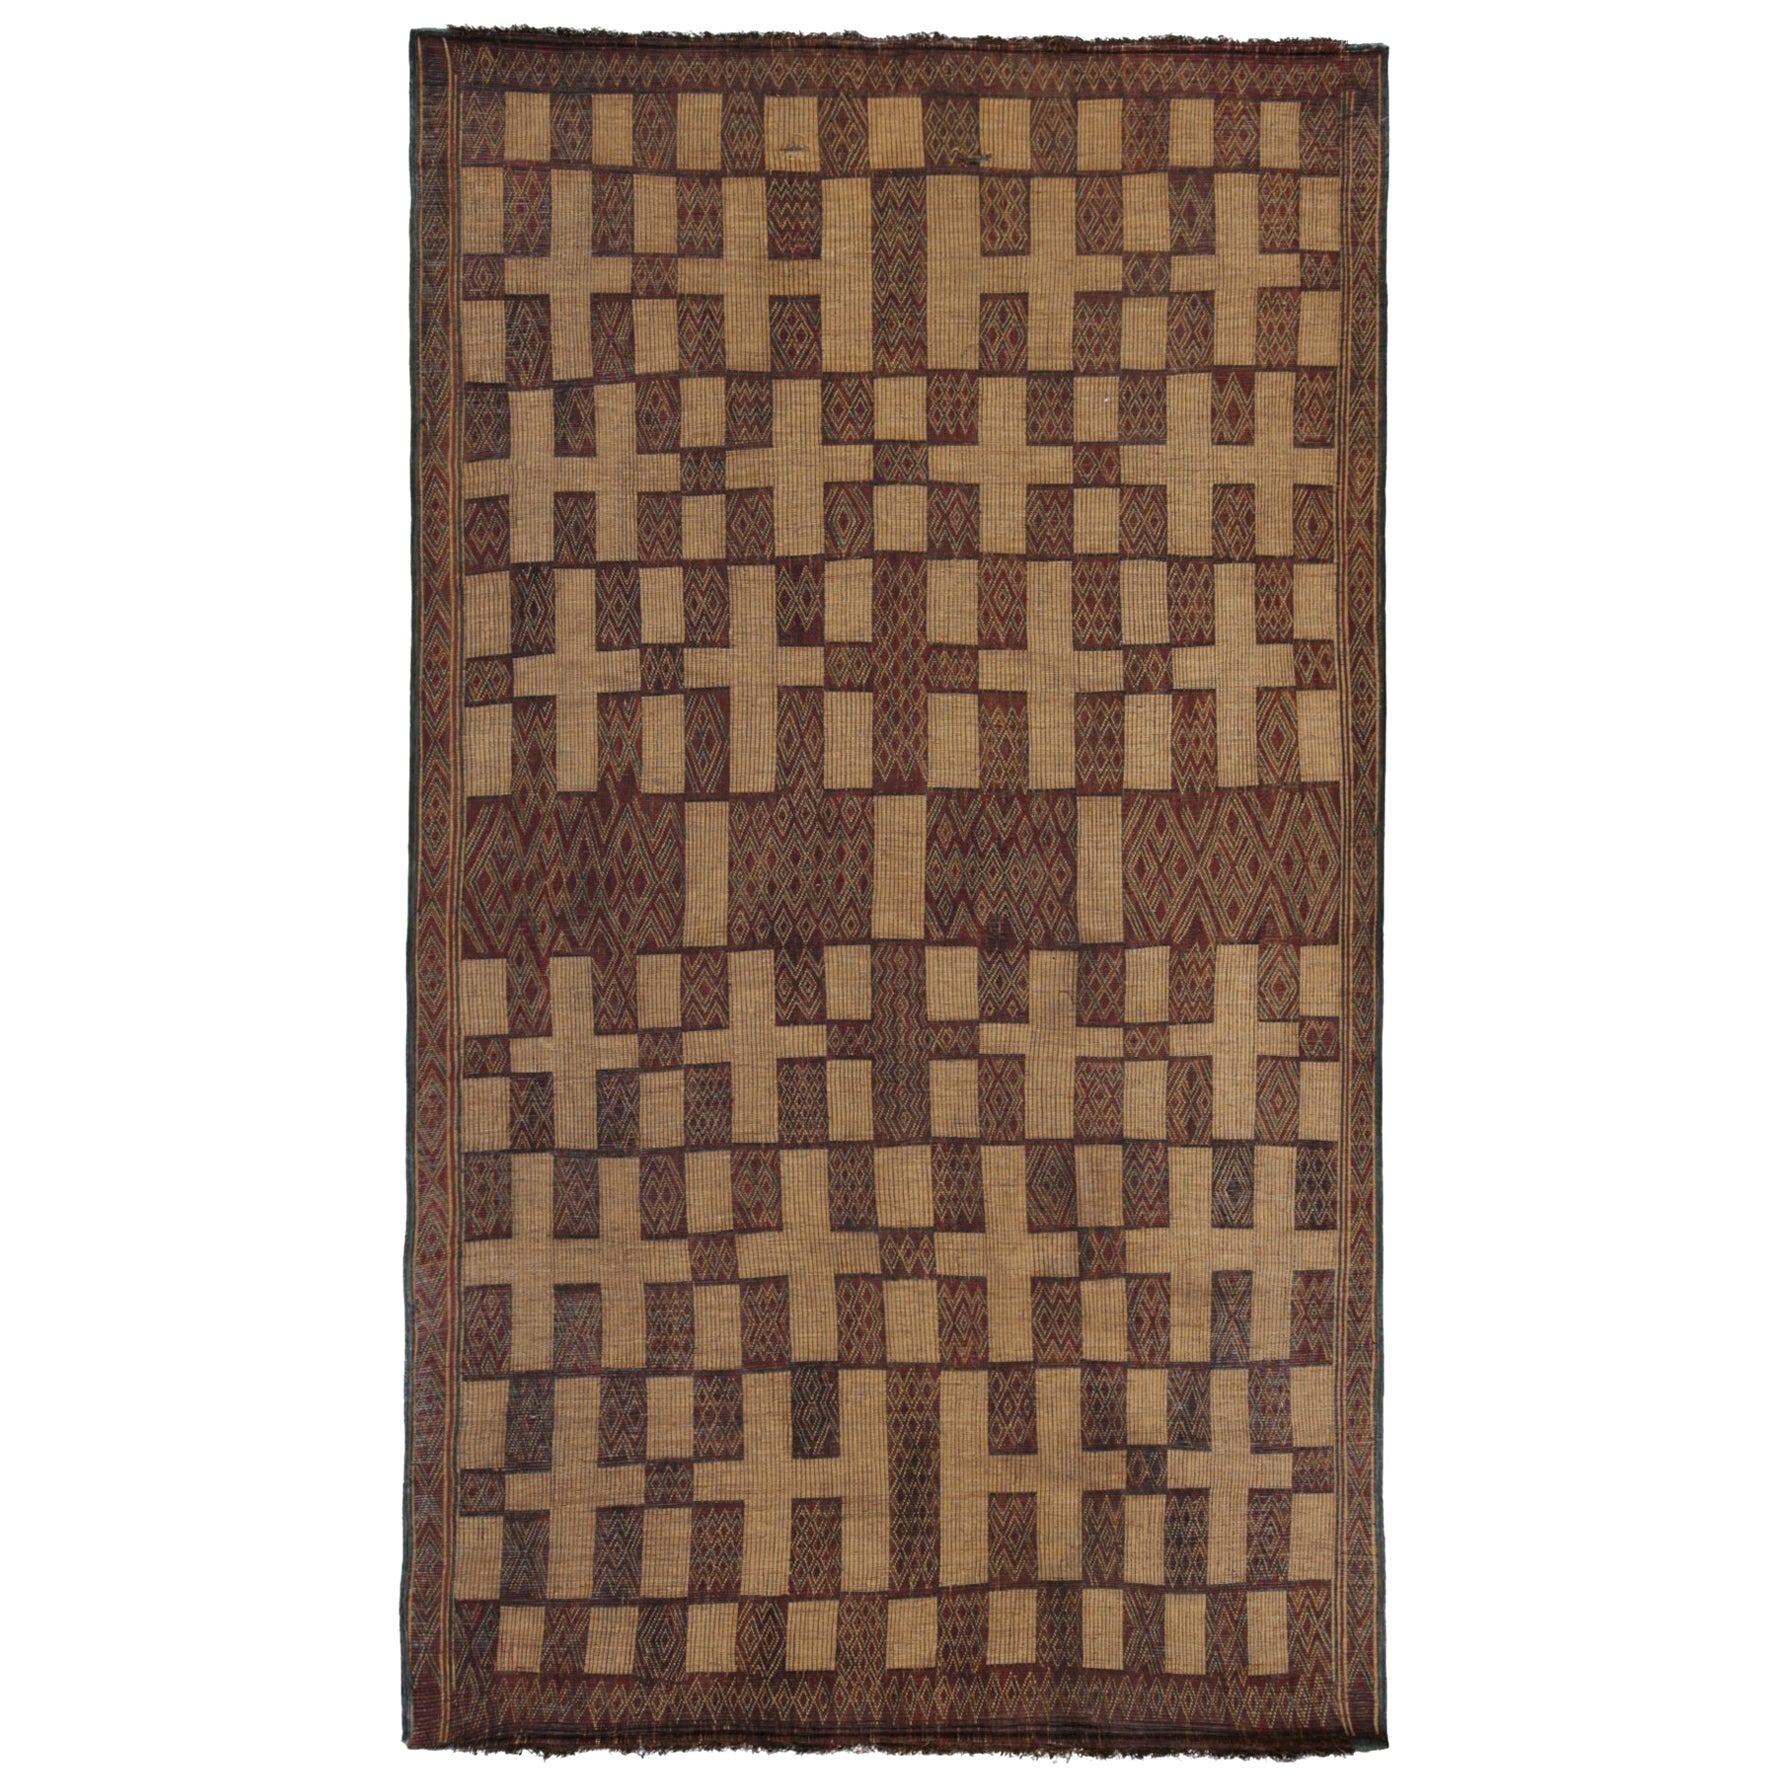 Vintage Moroccan Tuareg Mat in Beige & Red Geometric Patterns, from Rug & Kilim For Sale